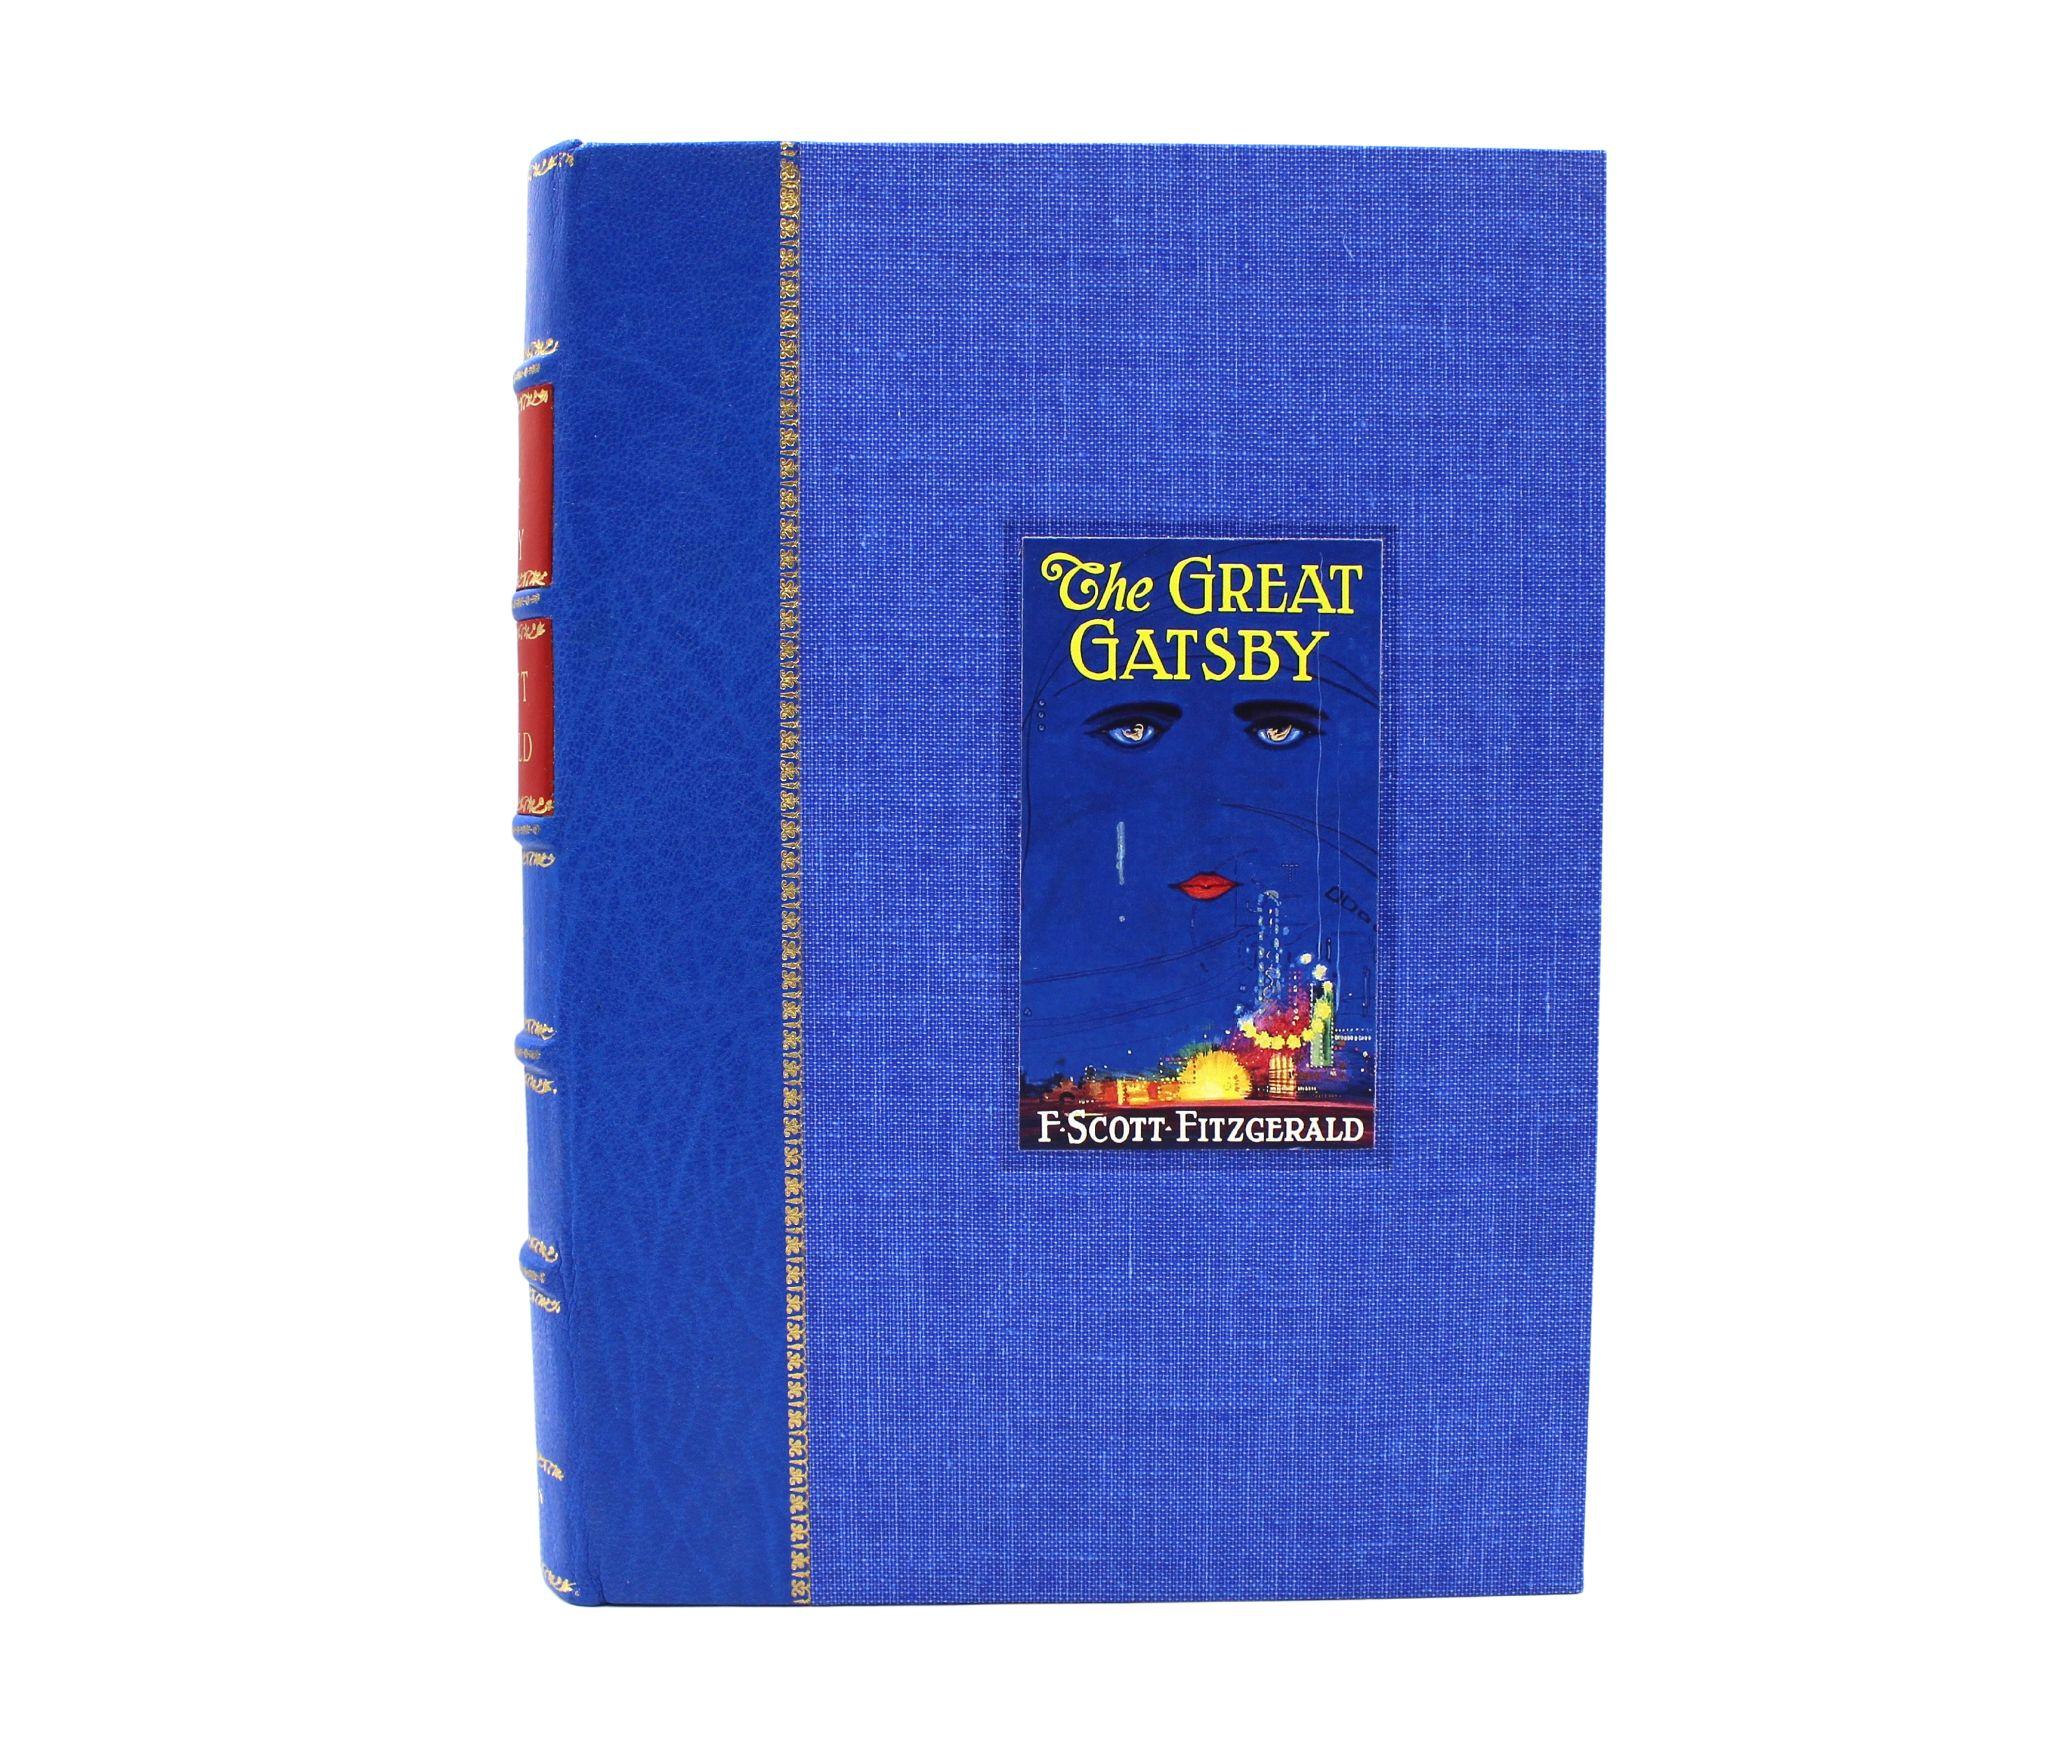 The Great Gatsby by F. Scott Fitzgerald, First Edition, First Issue, 1925 5